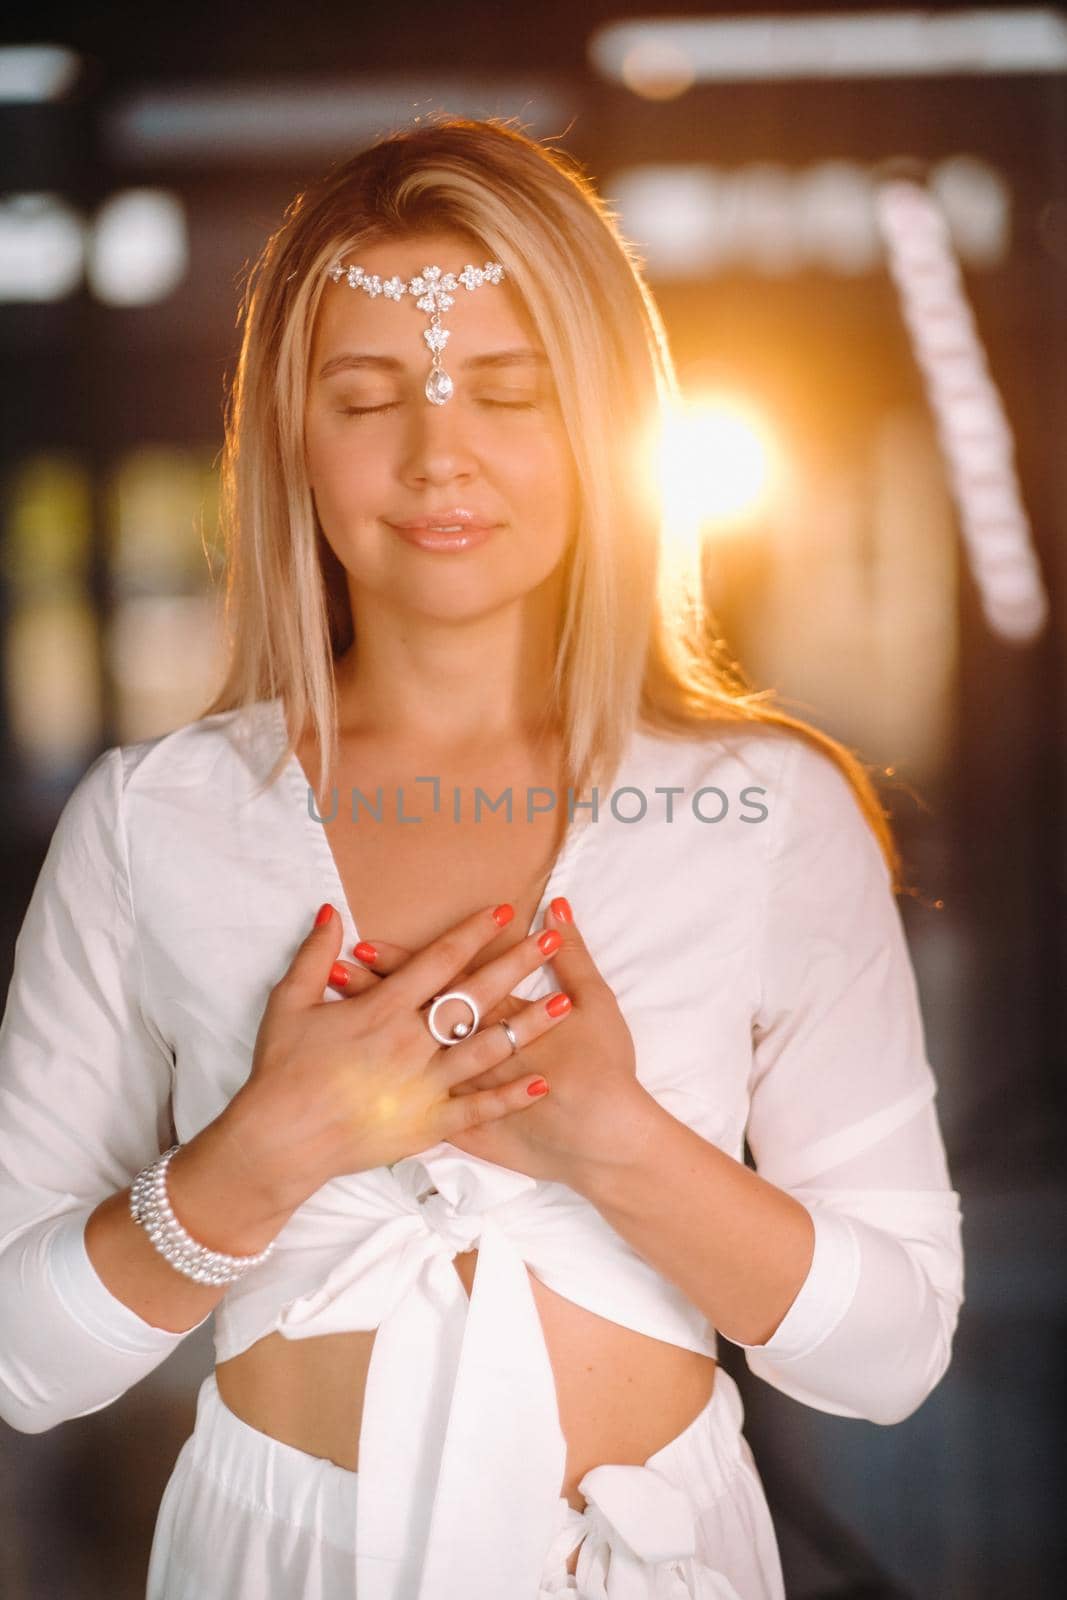 Portrait of a smiling girl in a white dress with her palms clasped in front of her.